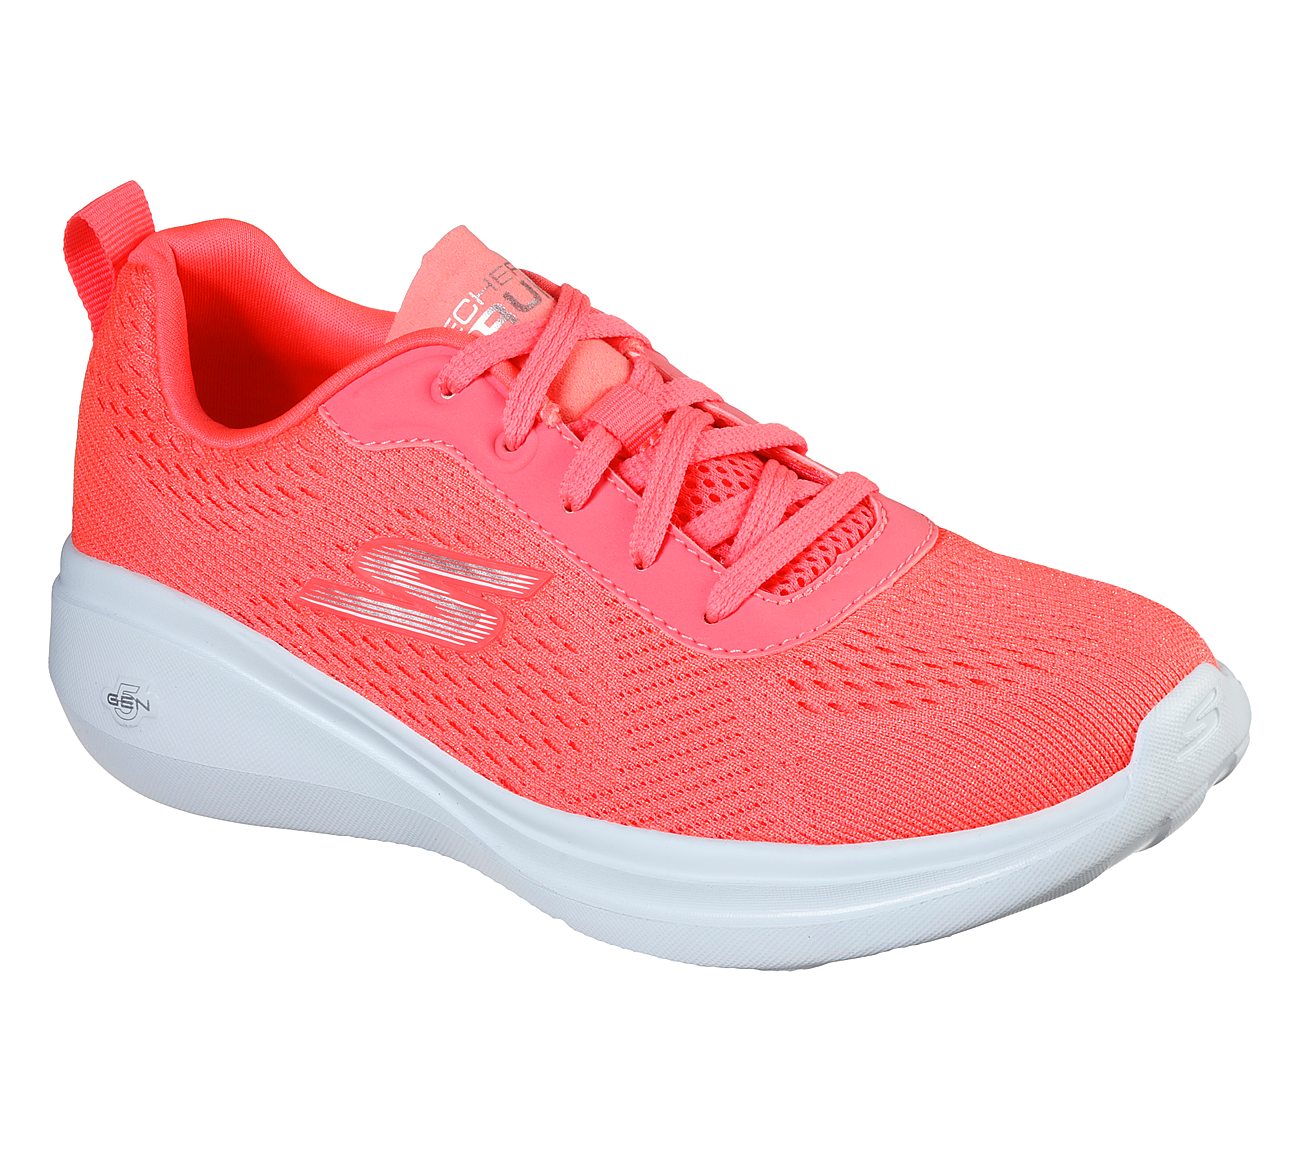 GO RUN FAST-FLOAT, HOT PINK Footwear Lateral View